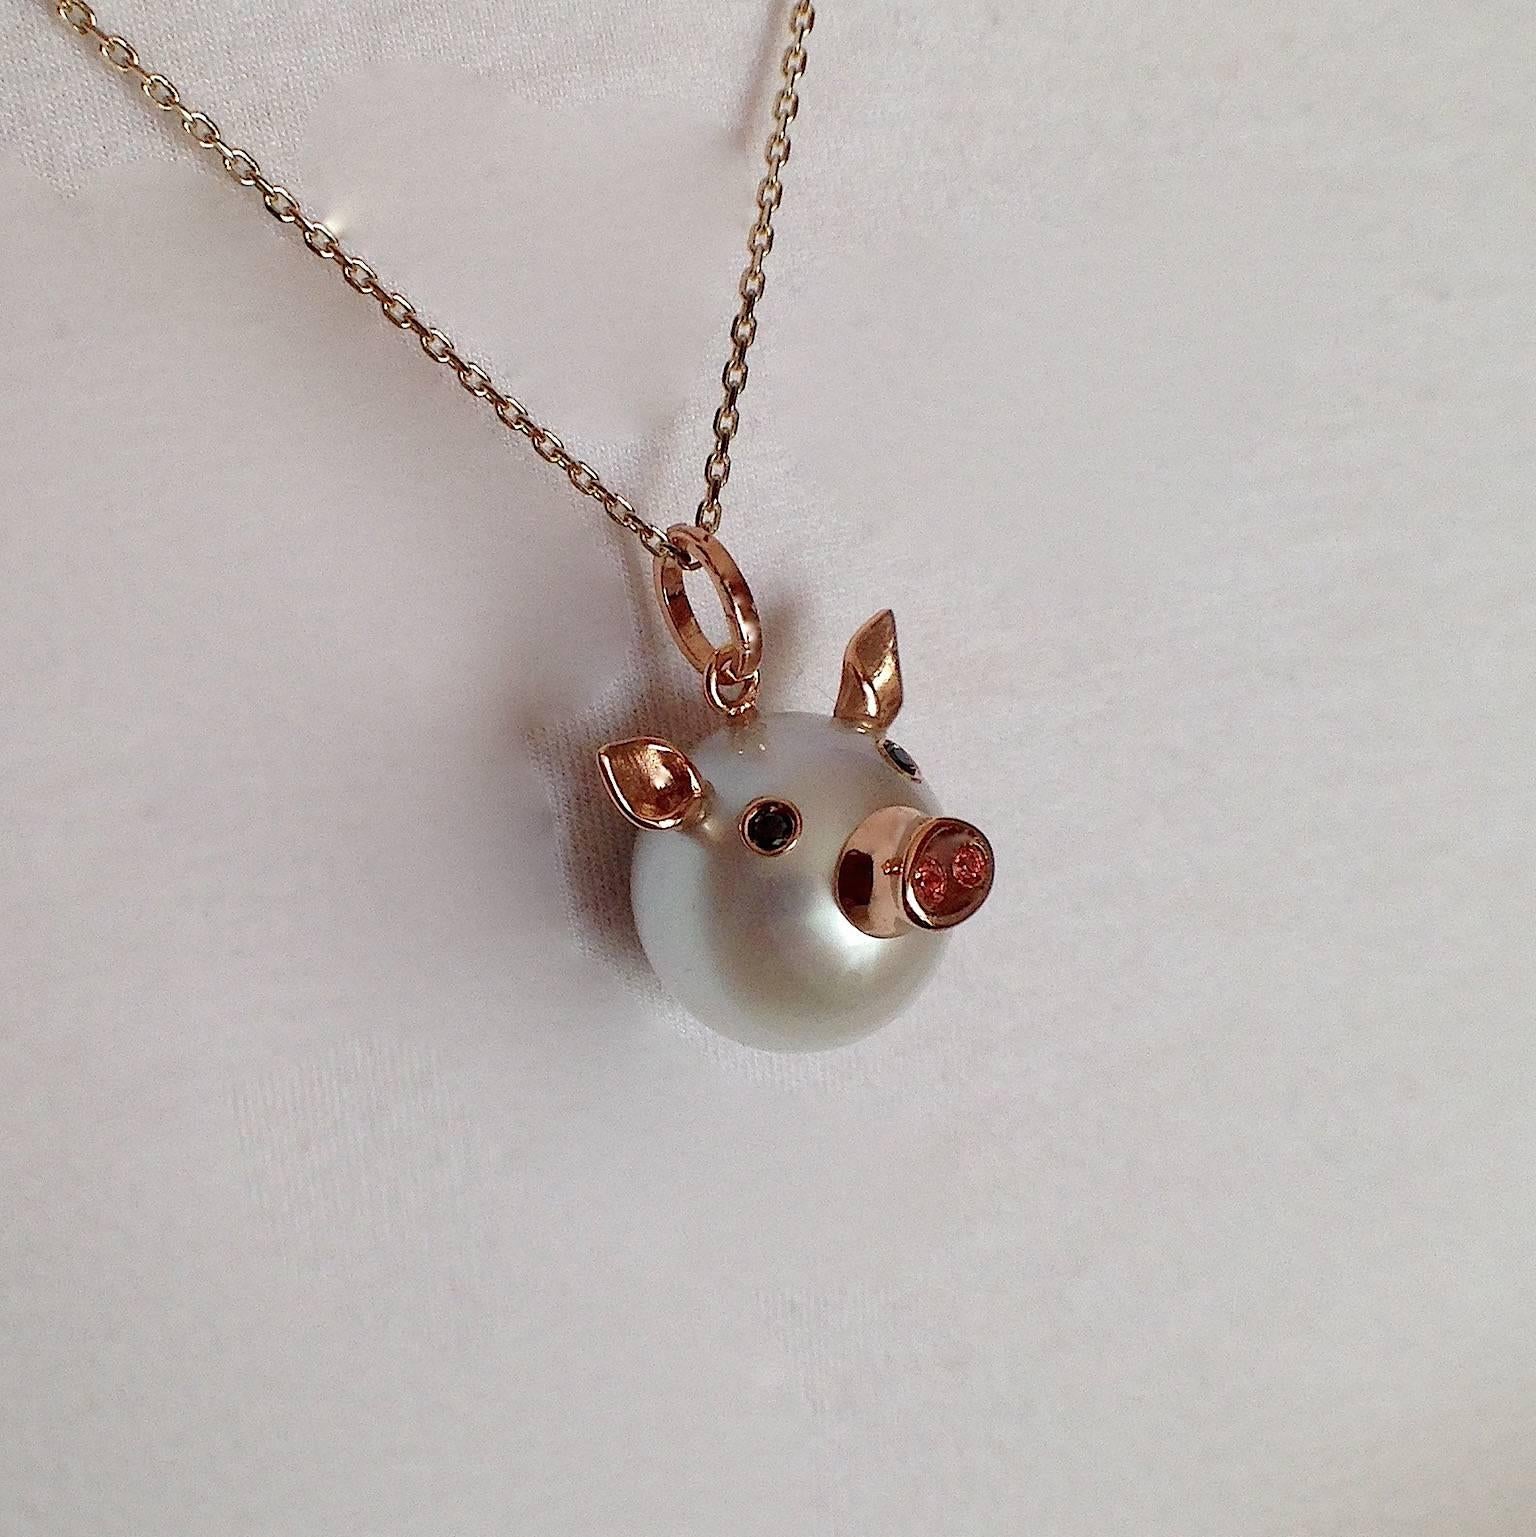 This nice pendant is made with a button Australian pearl. 
It has two ears, two eyes with black diamonds.  
In the holes of its nose there are two orange sapphires encrusted, in total ct 0.03.
All the particulars made in red gold.
The diamonds are